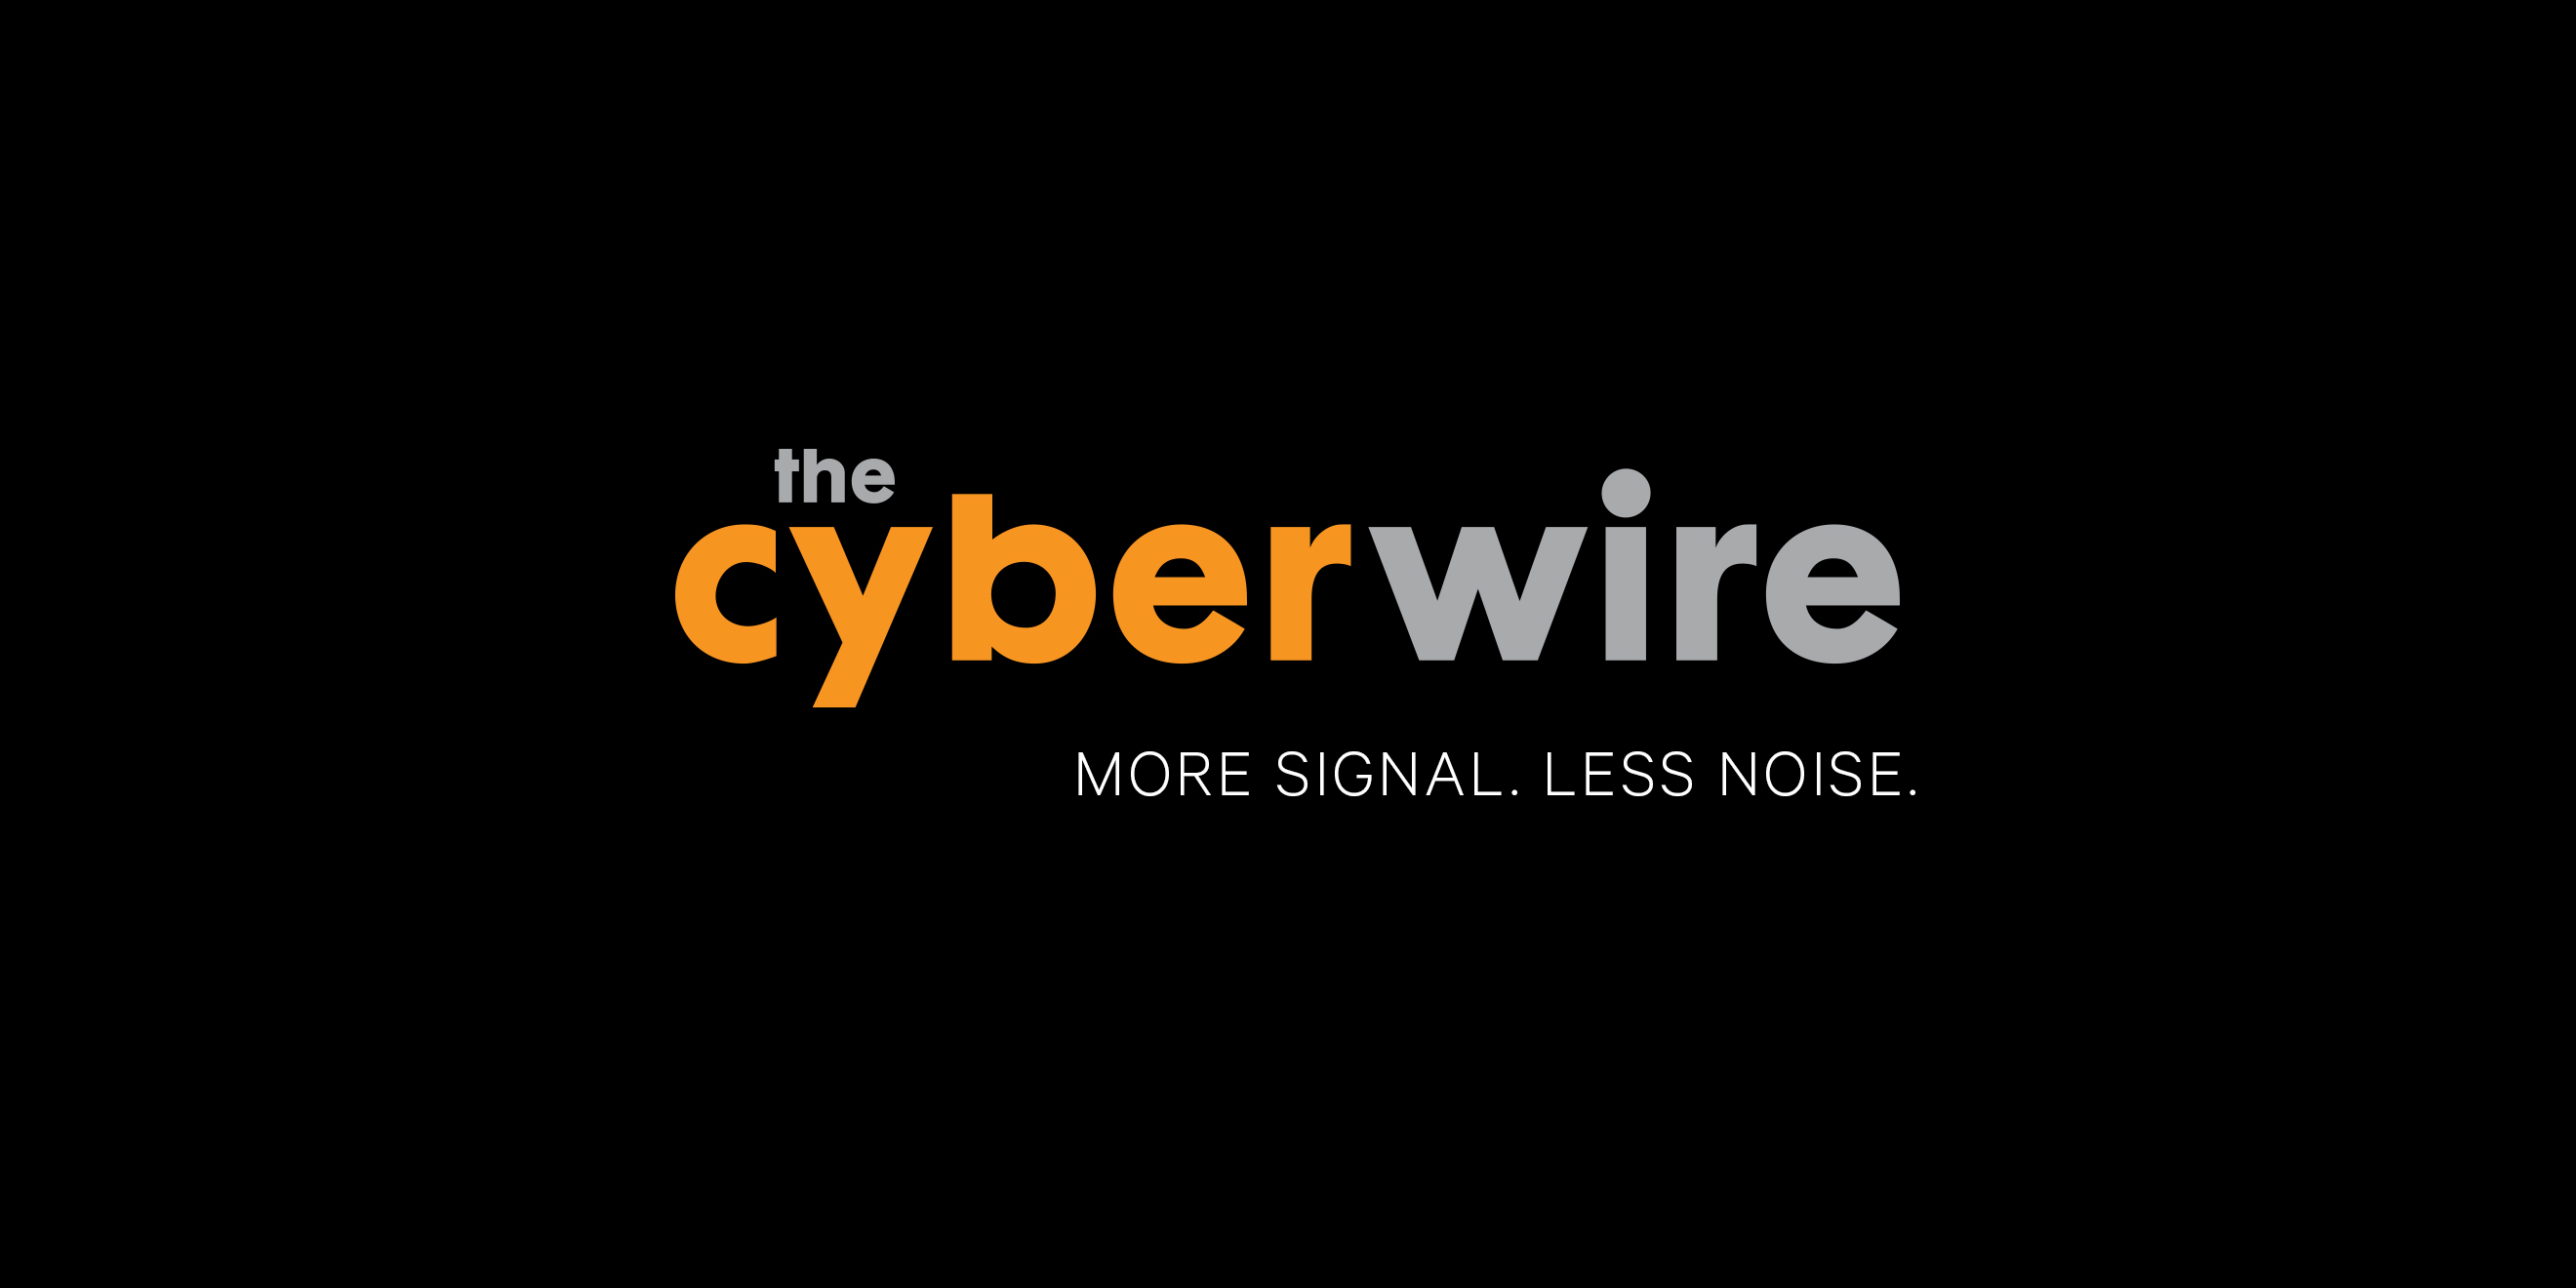 Cybersecurity veteran Rick Howard joins the CyberWire as CSO and Chief Analyst